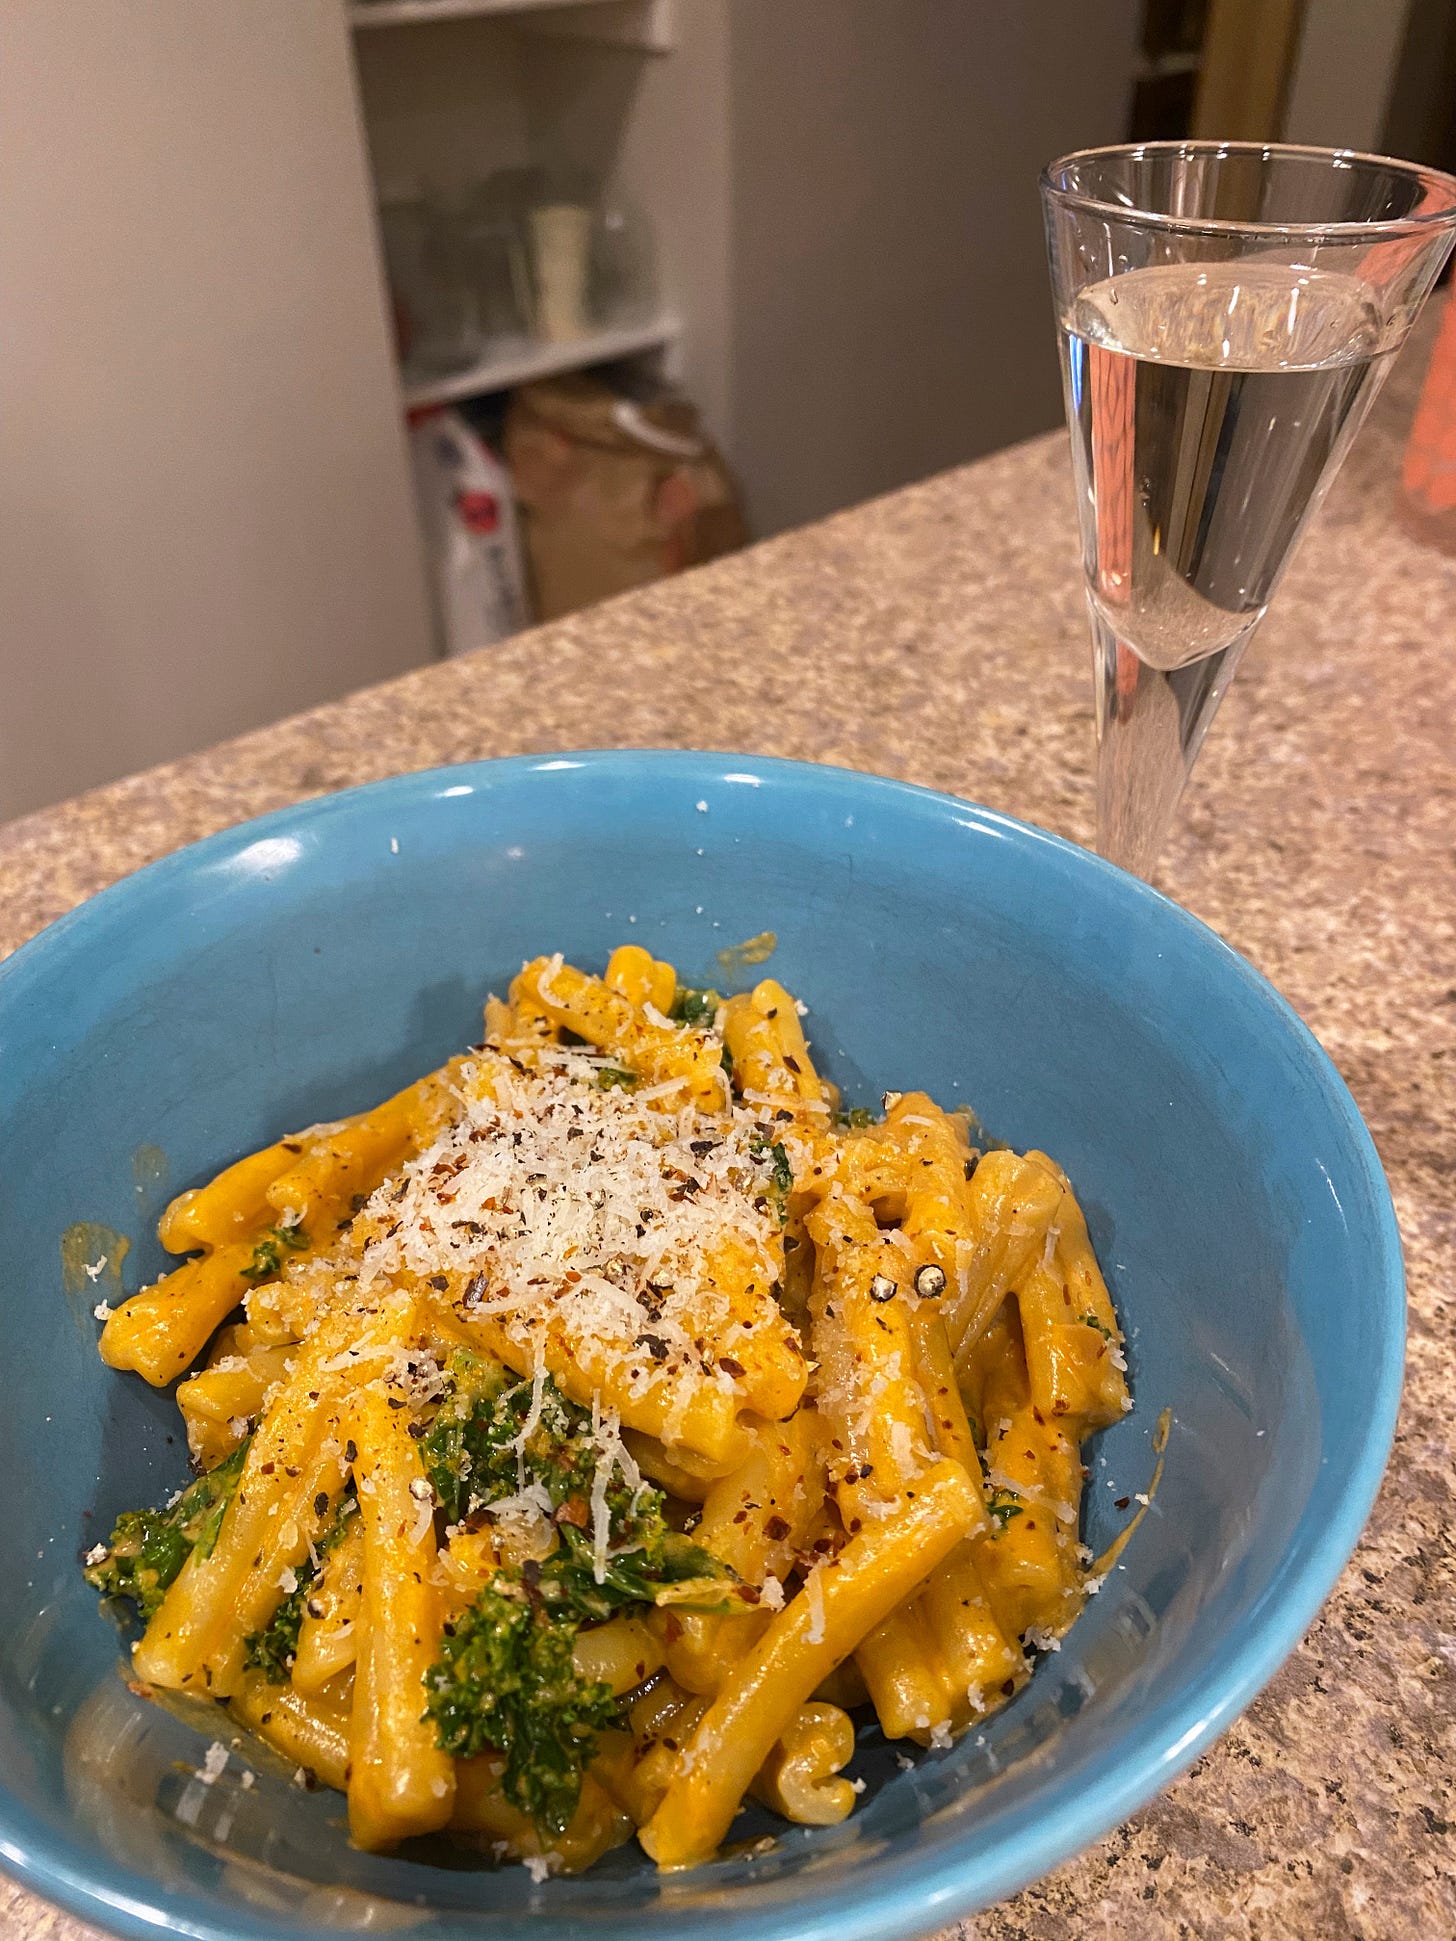 A blue bowl of casarecce in vodka sauce with pieces of green kale, and grated parmesan and chili flakes on top. Beside it is a small glass of white amaro.